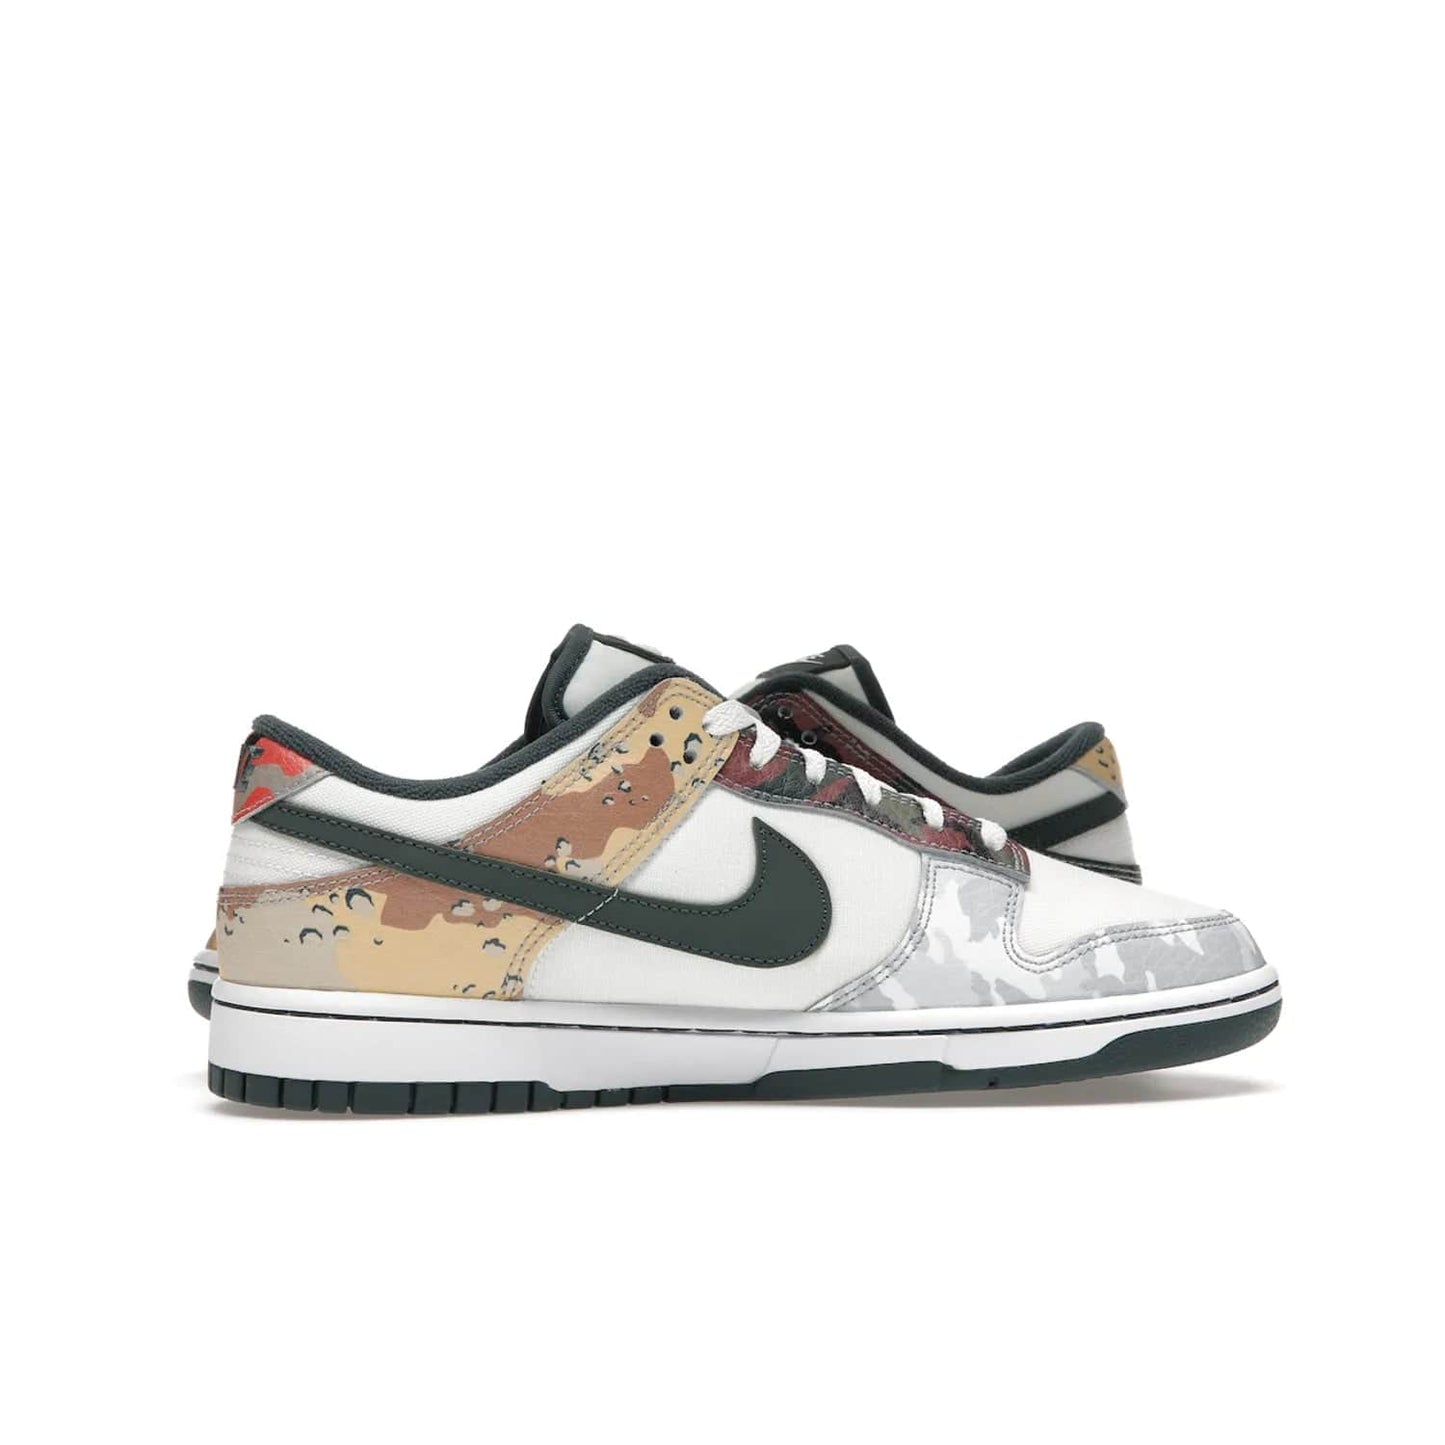 Nike Dunk Low SE Sail Multi-Camo - Image 18 - Only at www.BallersClubKickz.com - Classic design meets statement style in the Nike Dunk Low SE Sail Multi-Camo. White leather base with multi-color camo overlays, vibrant Nike Swooshes, and orange Nike embroidery. Get yours August 2021.